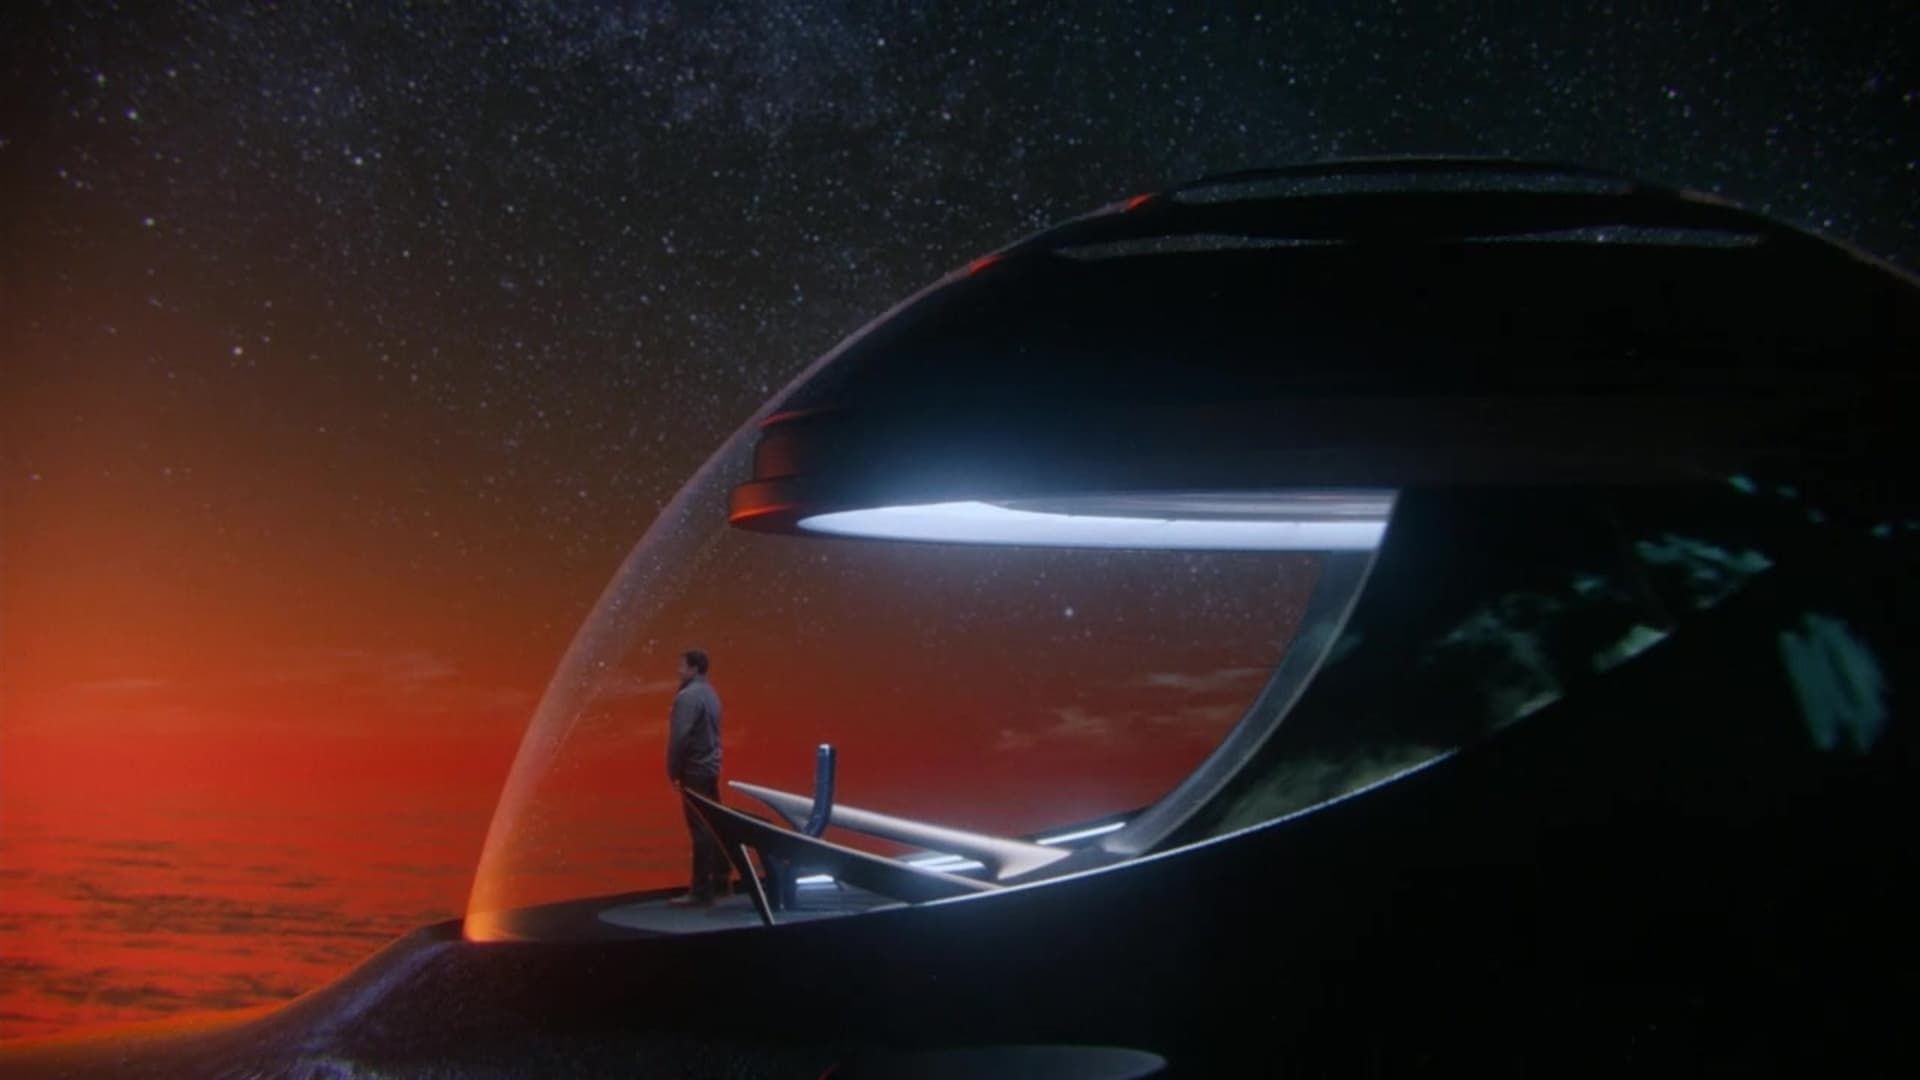 Cosmos: A Spacetime Odyssey background